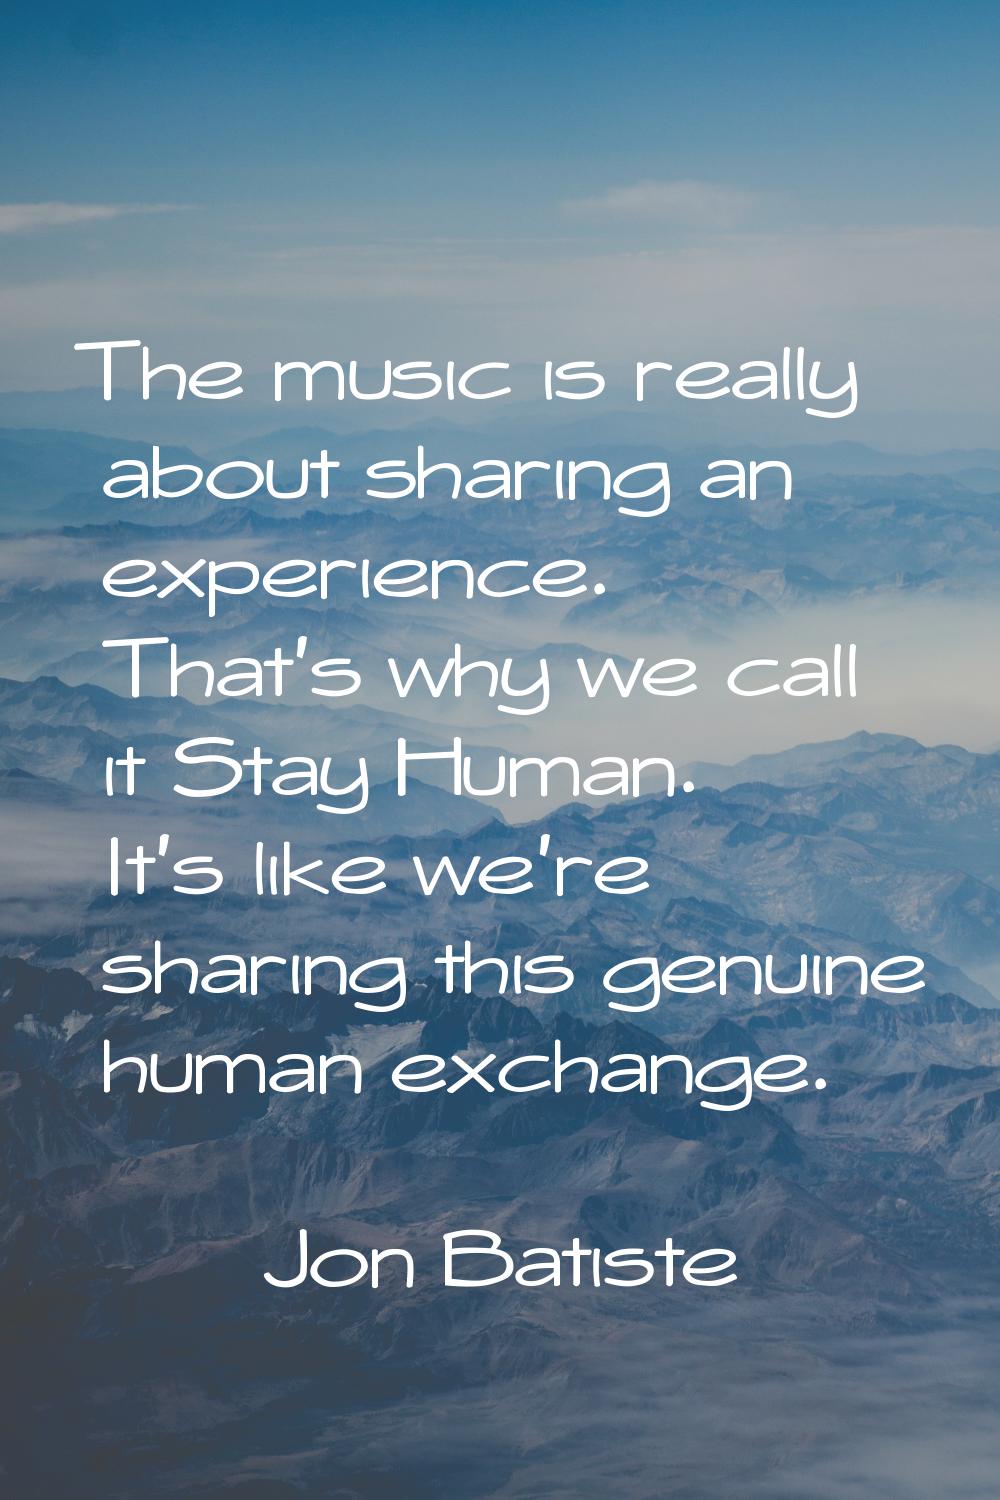 The music is really about sharing an experience. That's why we call it Stay Human. It's like we're 